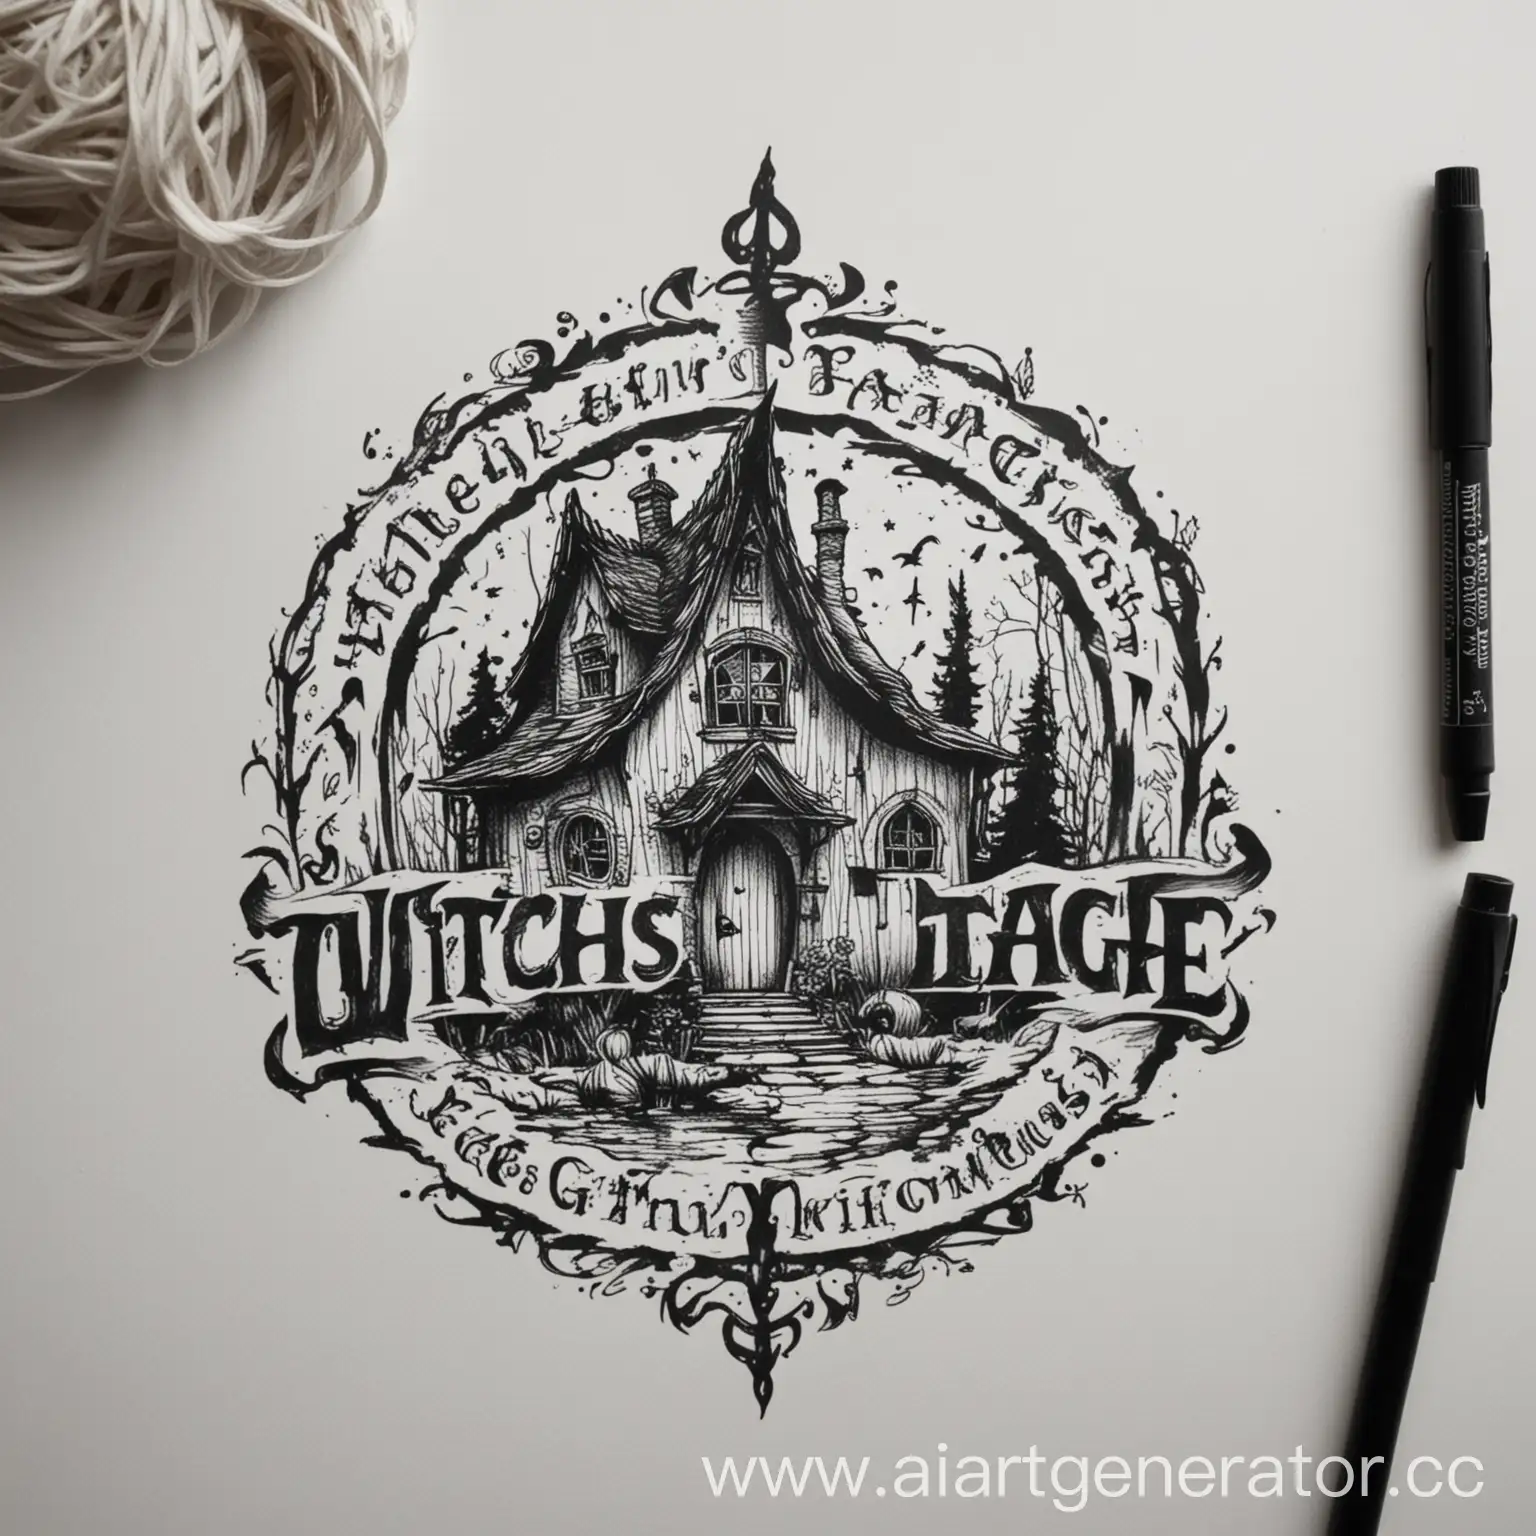 Illustration-of-The-Witchs-Cottage-Logo-on-White-Background